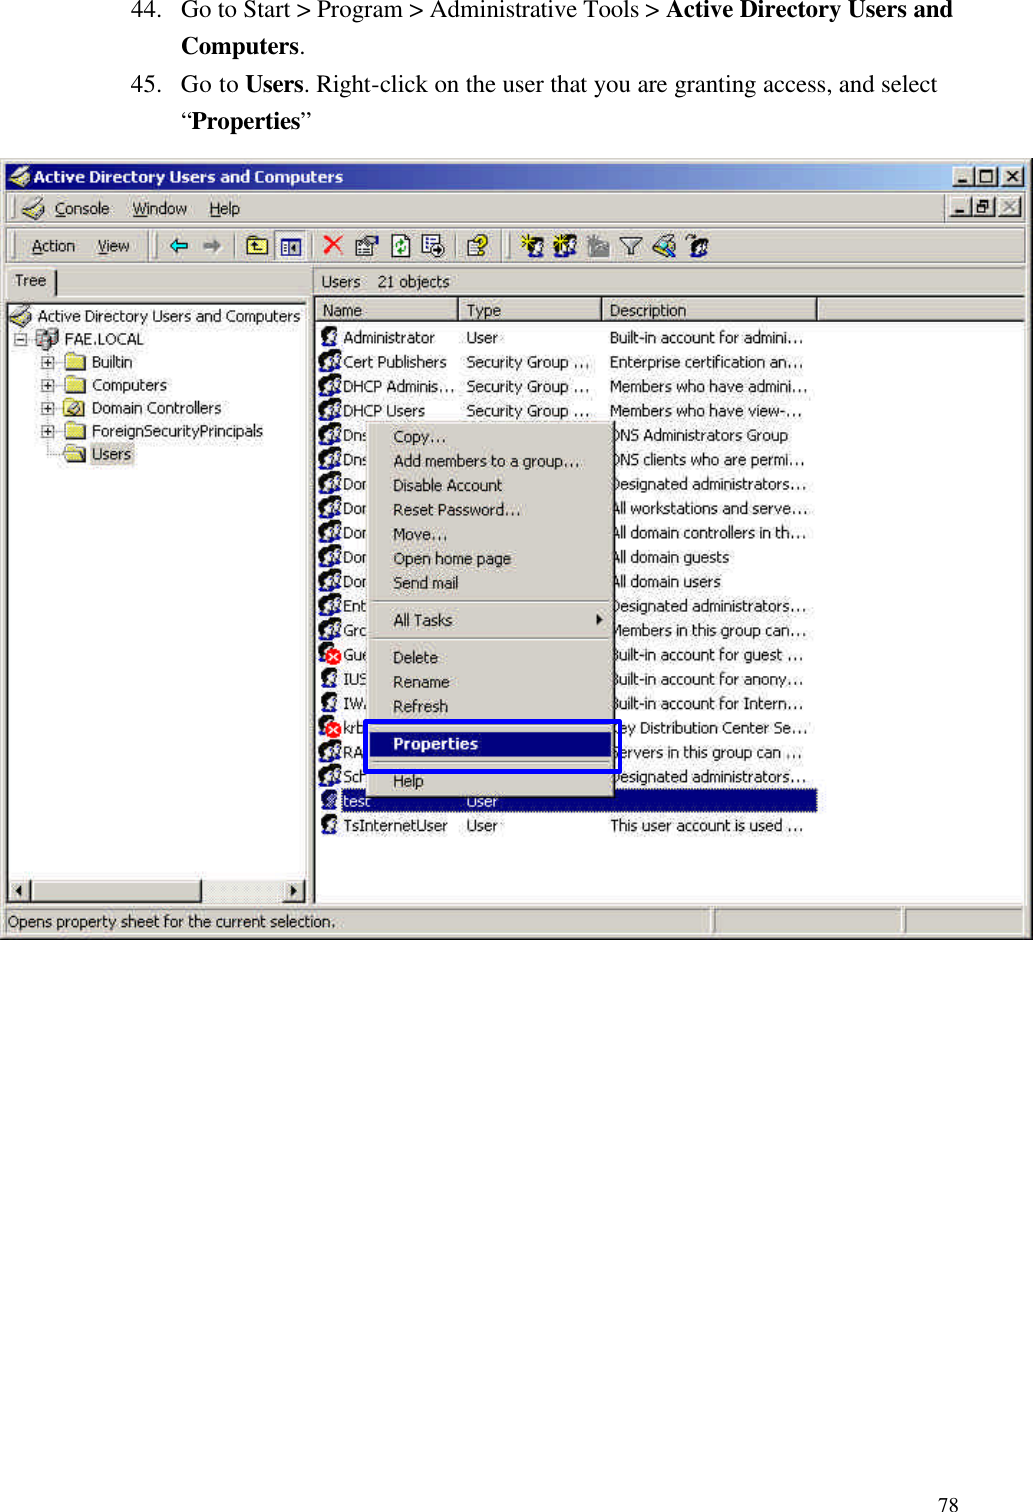  7844. Go to Start &gt; Program &gt; Administrative Tools &gt; Active Directory Users and Computers. 45. Go to Users. Right-click on the user that you are granting access, and select “Properties”                                